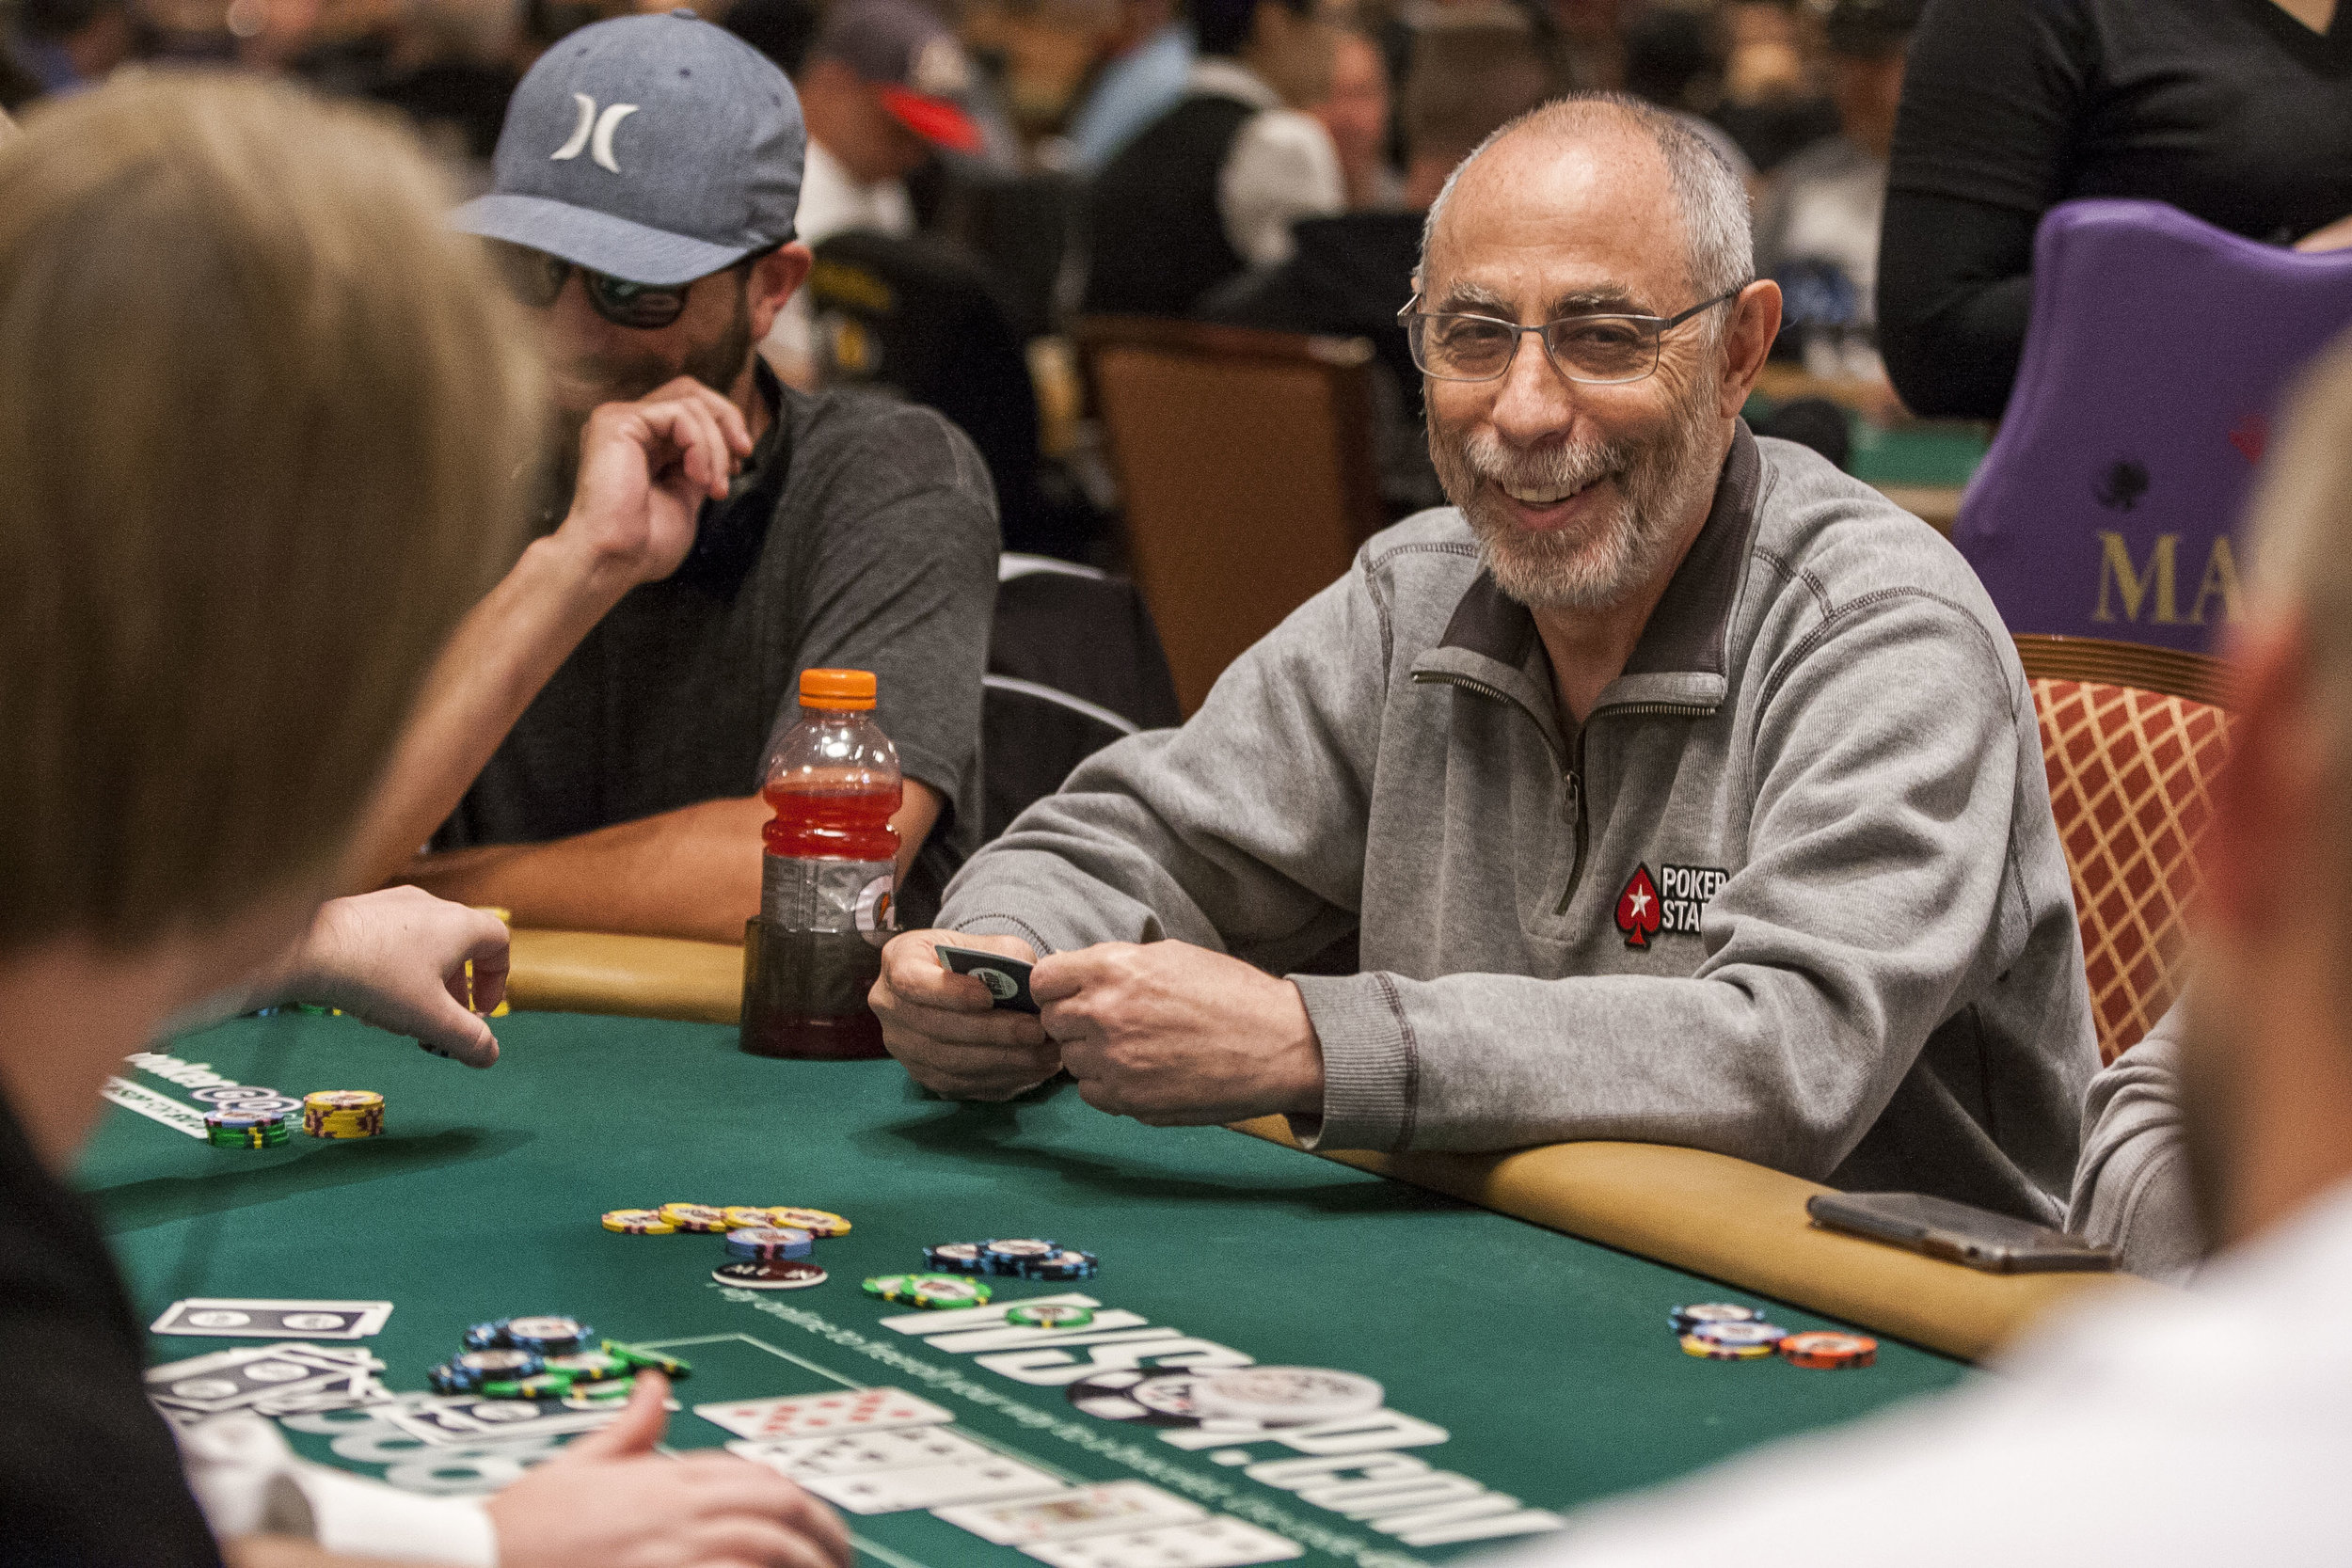  Barry Greenstein reacts after his decision to go all-in paid off in the $2,500 No-Limit Hold'em event in the World Series of Poker at the Rio Convention Center on Thursday, June 15, 2017.  Patrick Connolly Las Vegas Review-Journal @PConnPie 